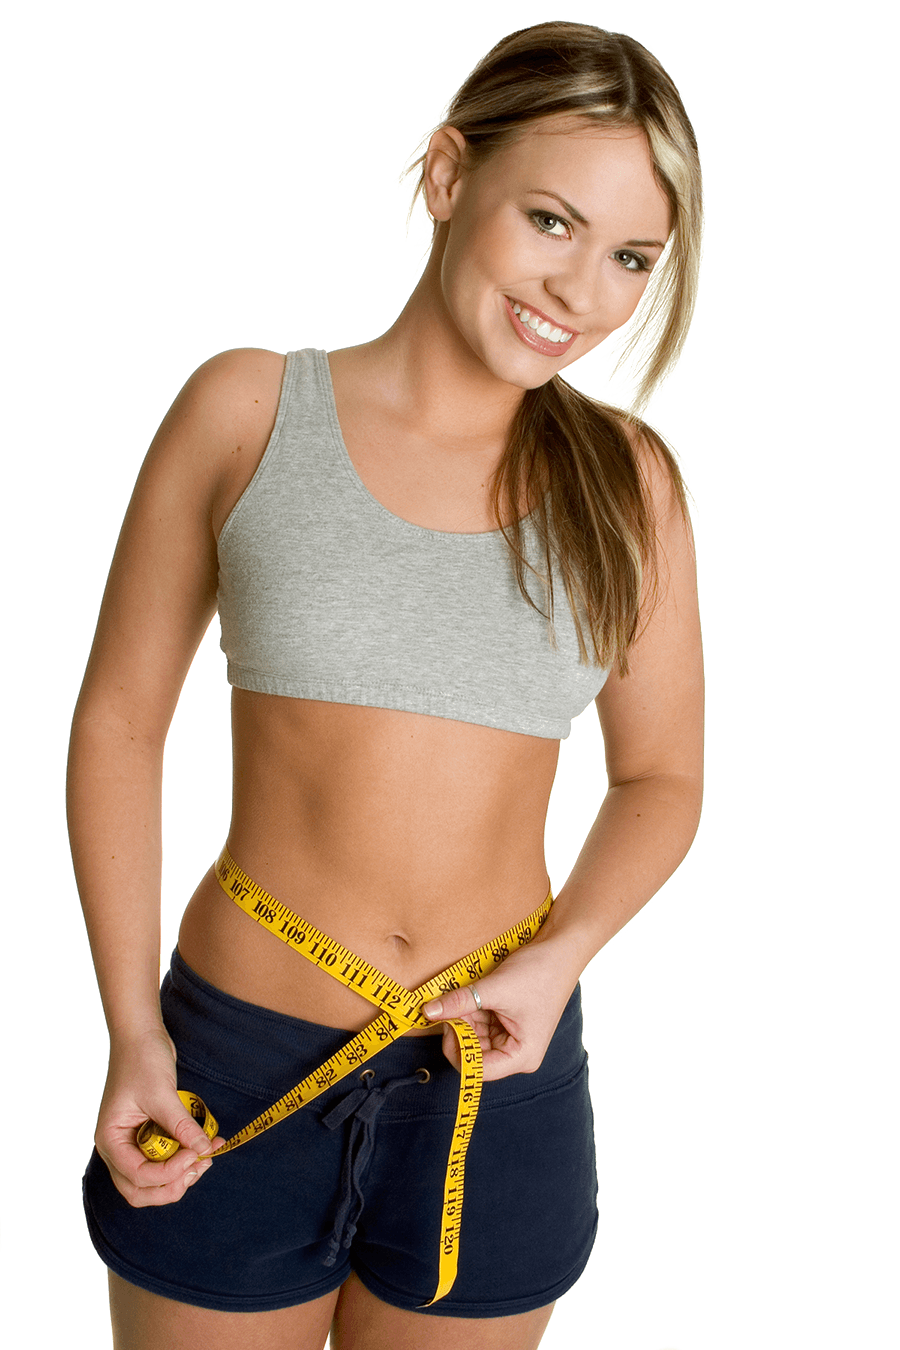 Girl Weight Loss PNG Images HD